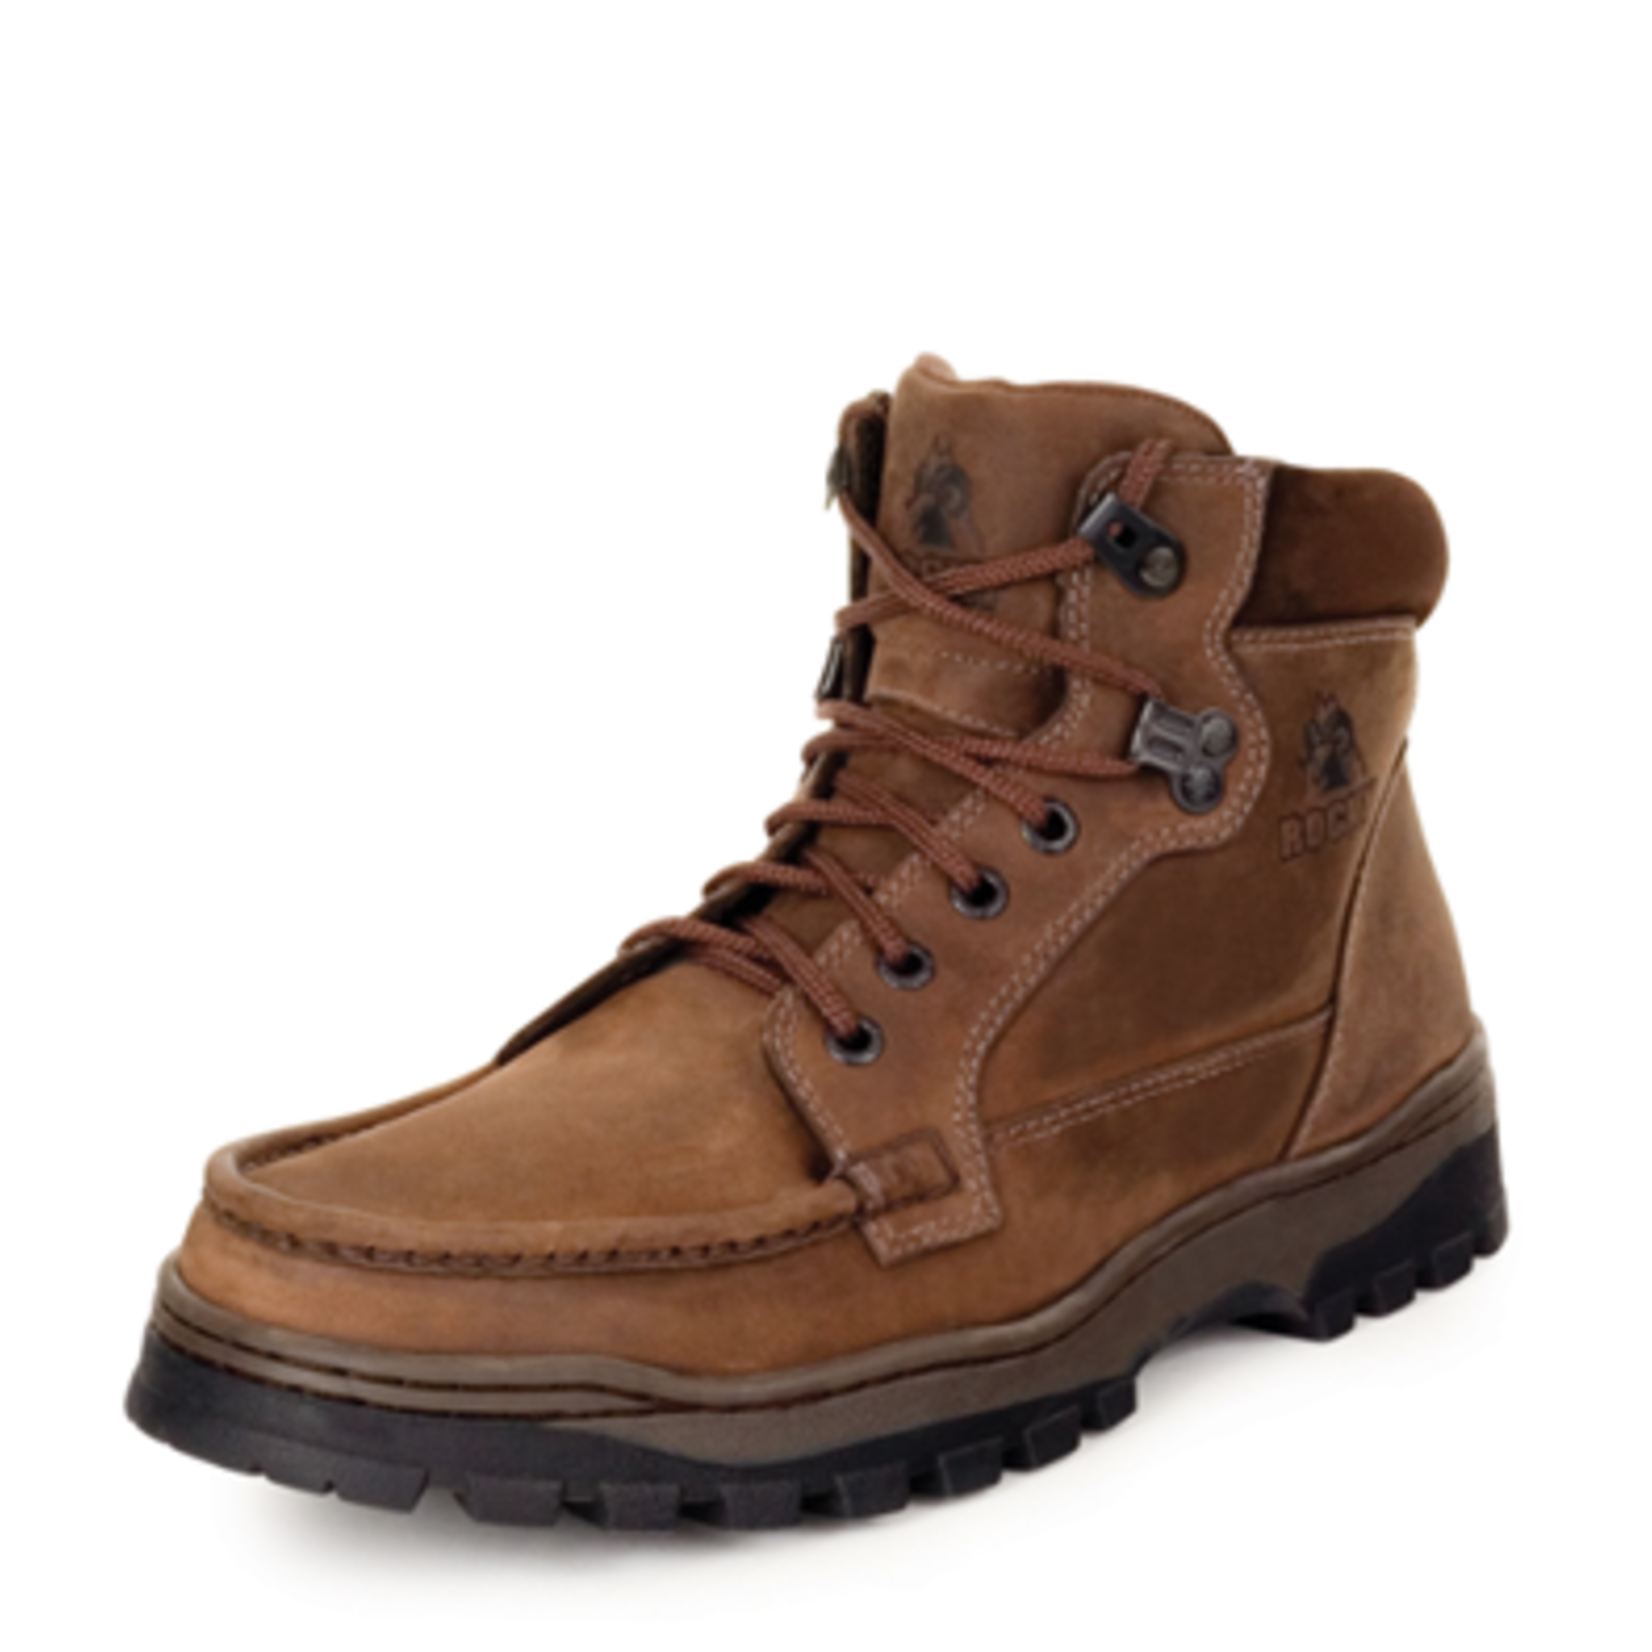 Rocky Boots Rocky Outback Gore Tex Boots 8723, Waterproof